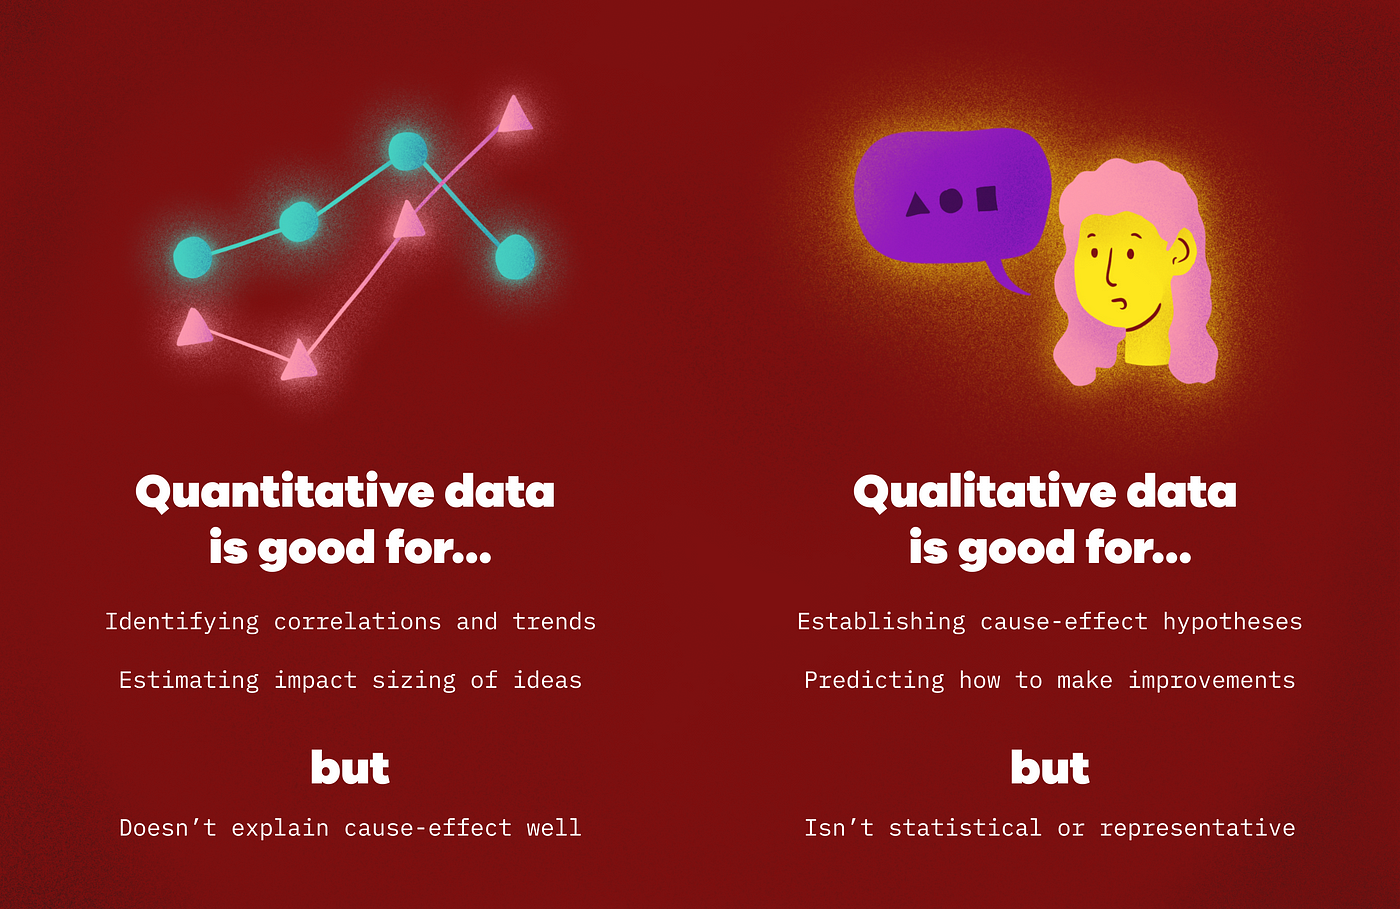 Quantitative data is good for identifying correlations and trends, and estimating impact sizing of ideas. But it doesn’t explain cause-effect relationships well. Qualitative data is good for establishing cause-effect hypotheses and predicting how to make improvements. But it isn’t statistical or representative of all users.